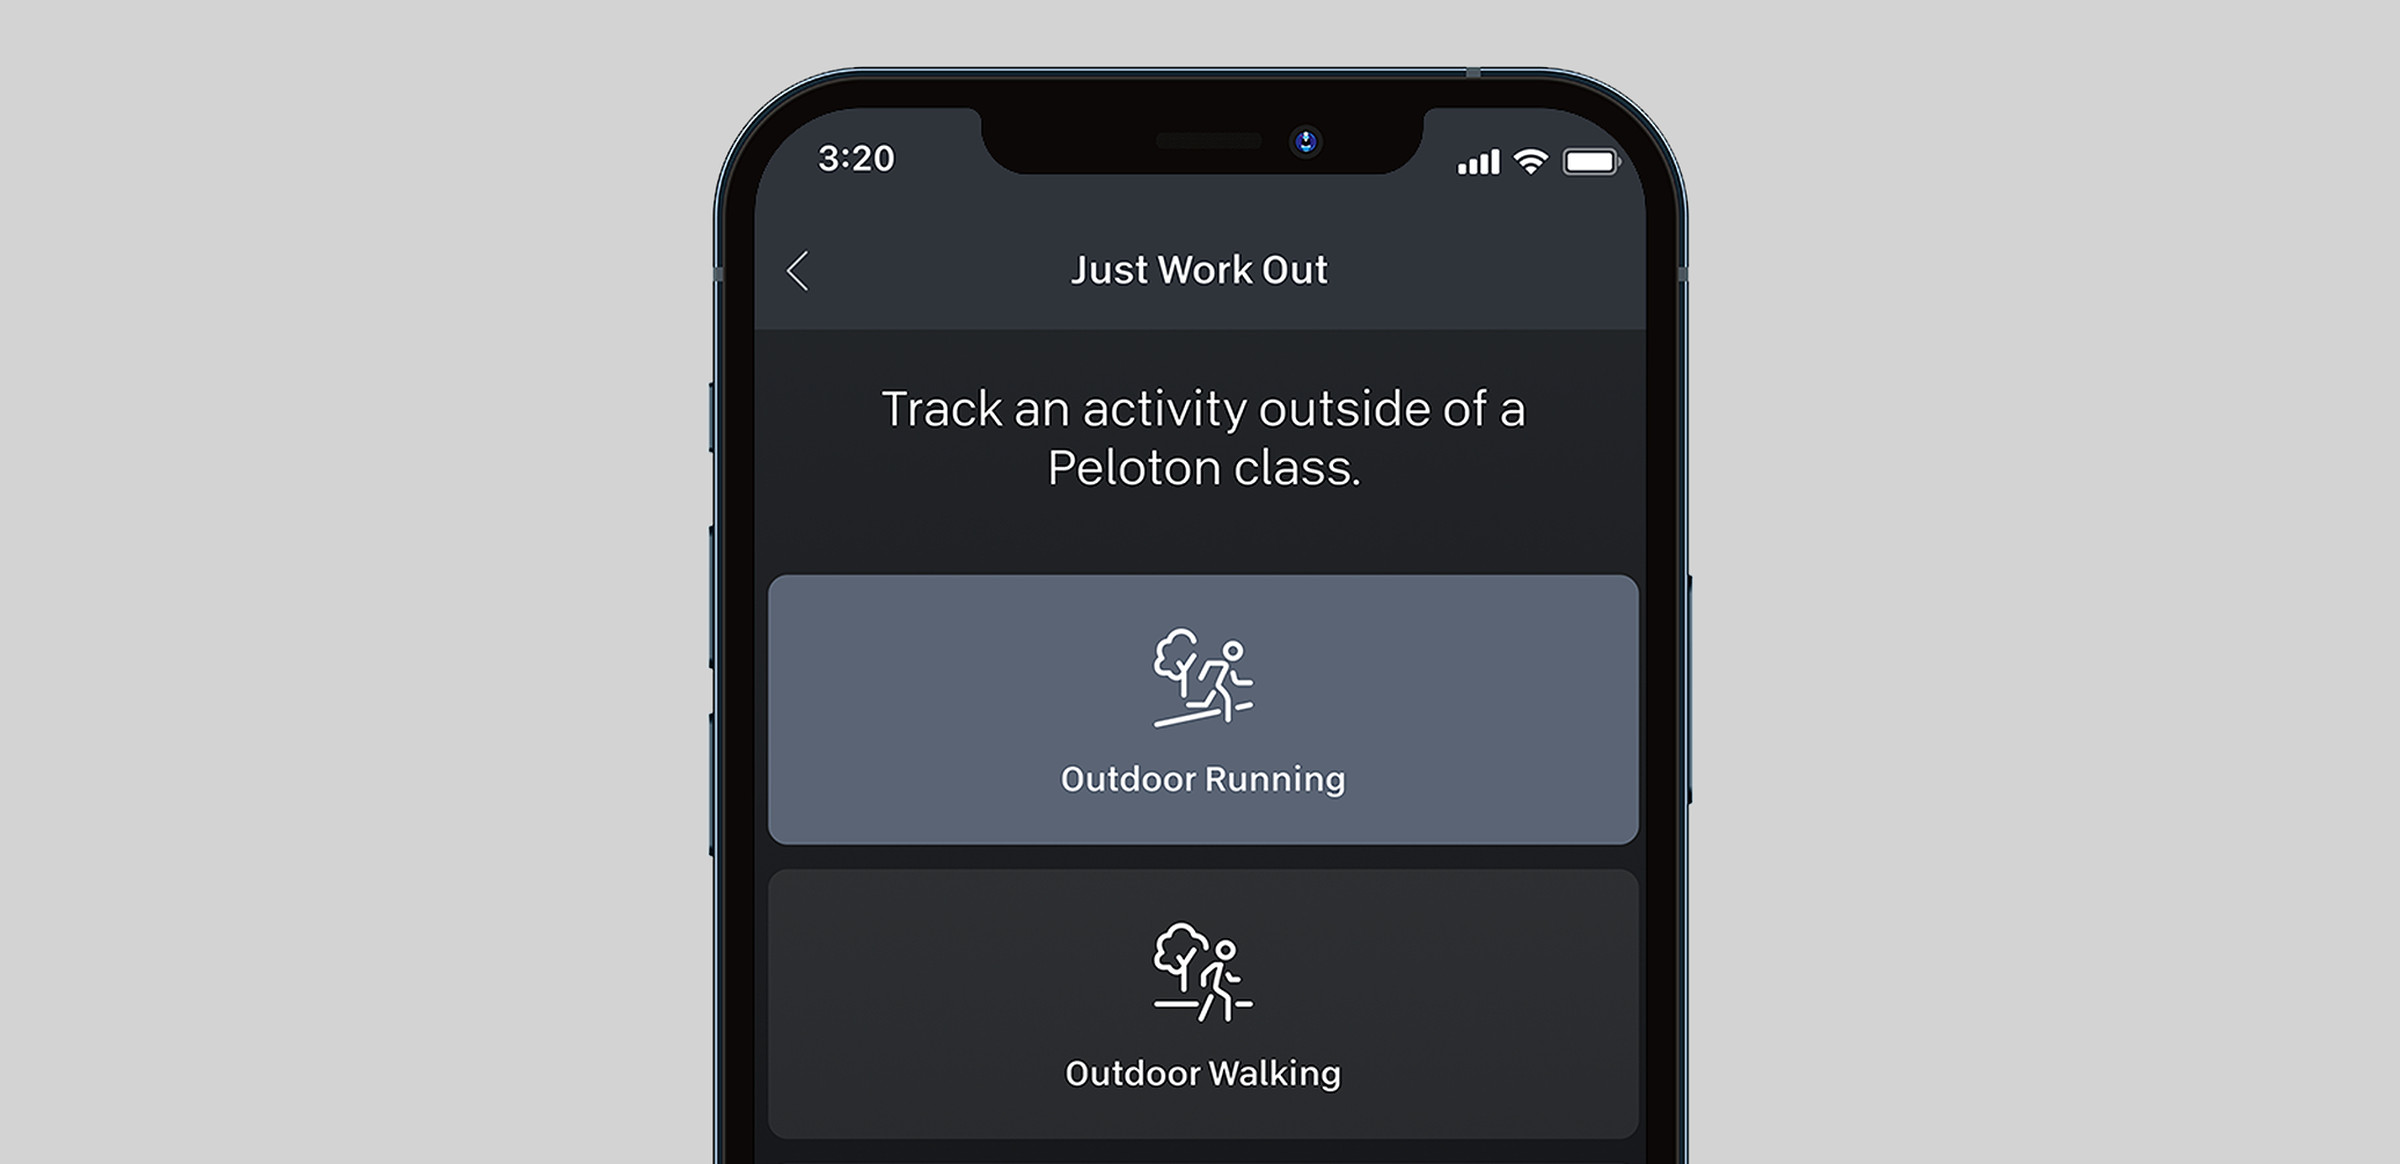 Just Workout gives users less incentive to leave the app to record their other workouts.